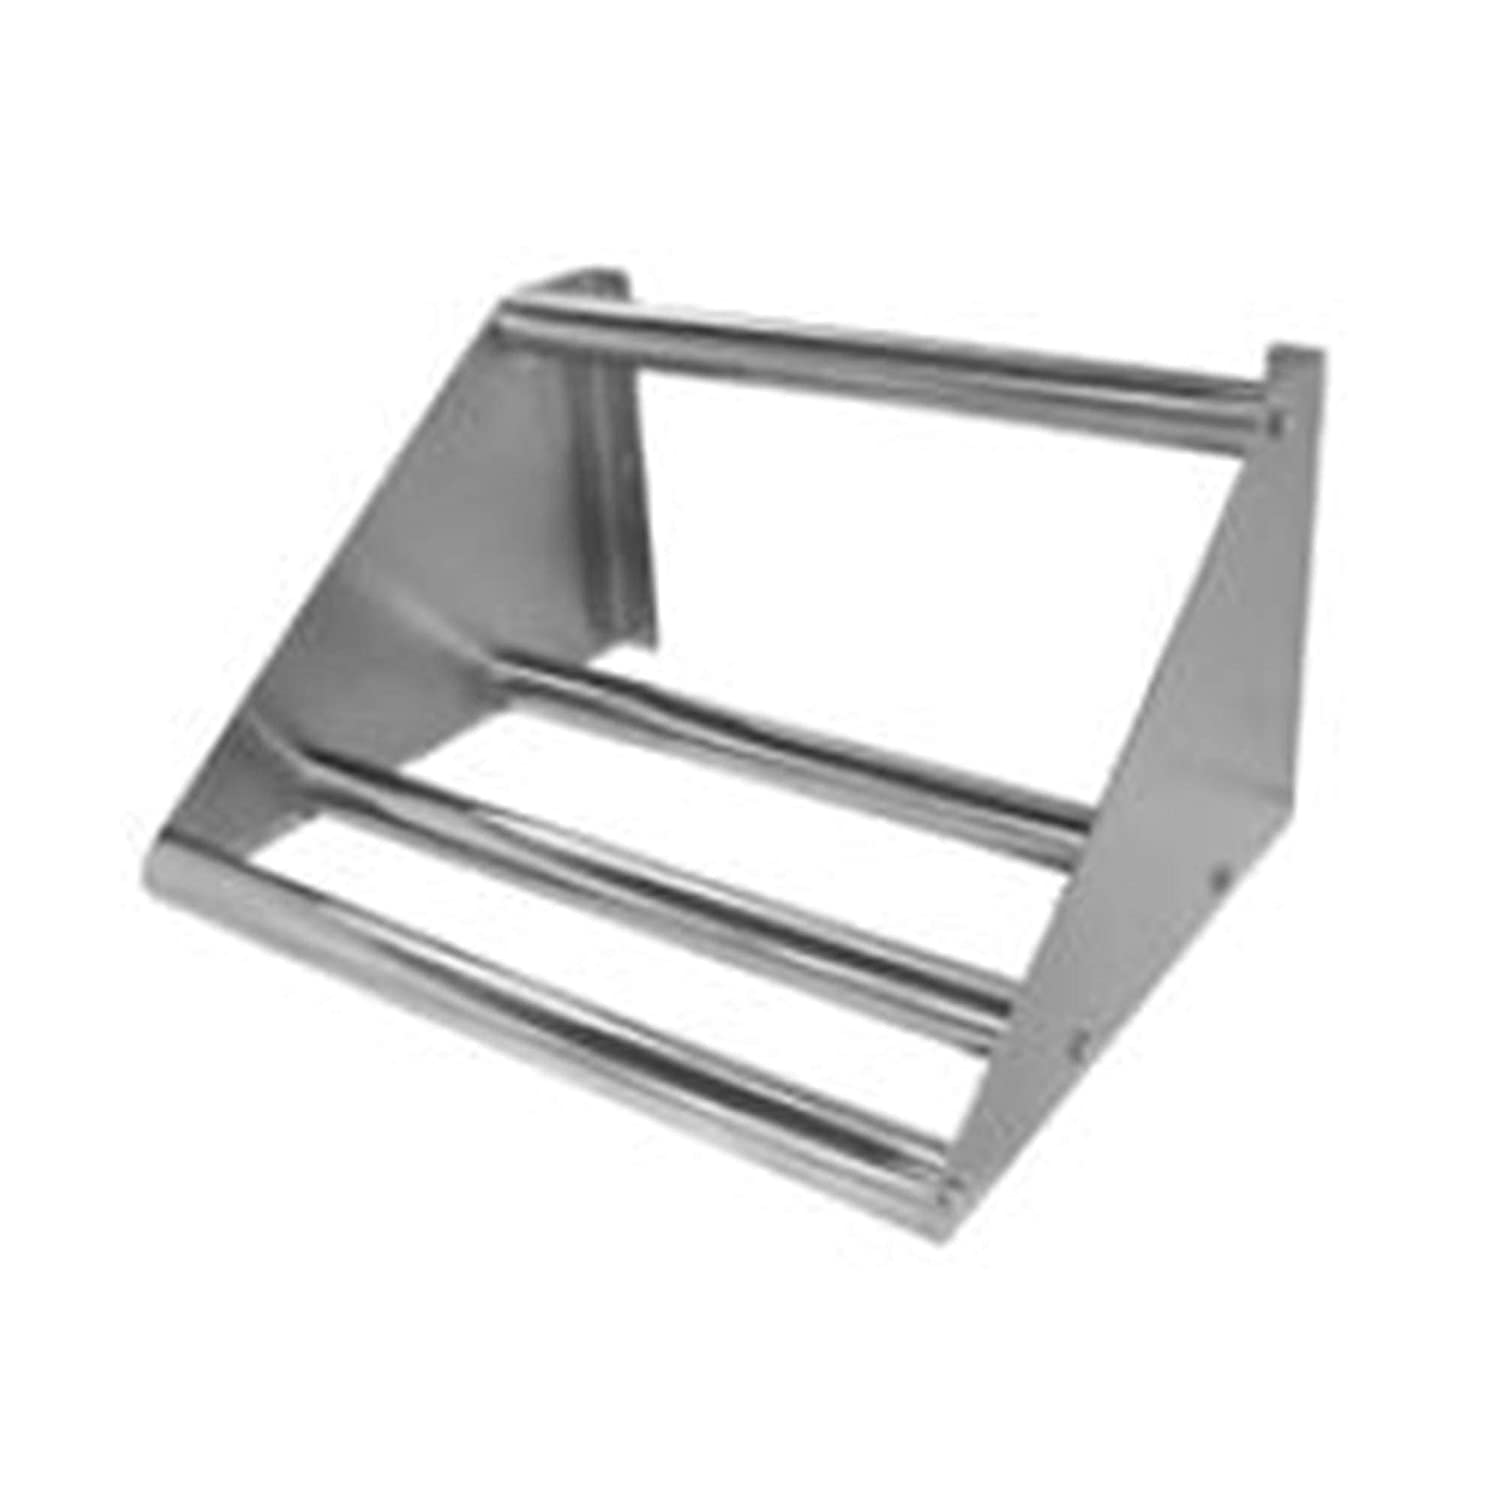 GSW Stainless Steel Tubular Dish Table Sorting Shelf for Washing and Storage, 42”W x 18”D x 11-1/4”H (42"W)